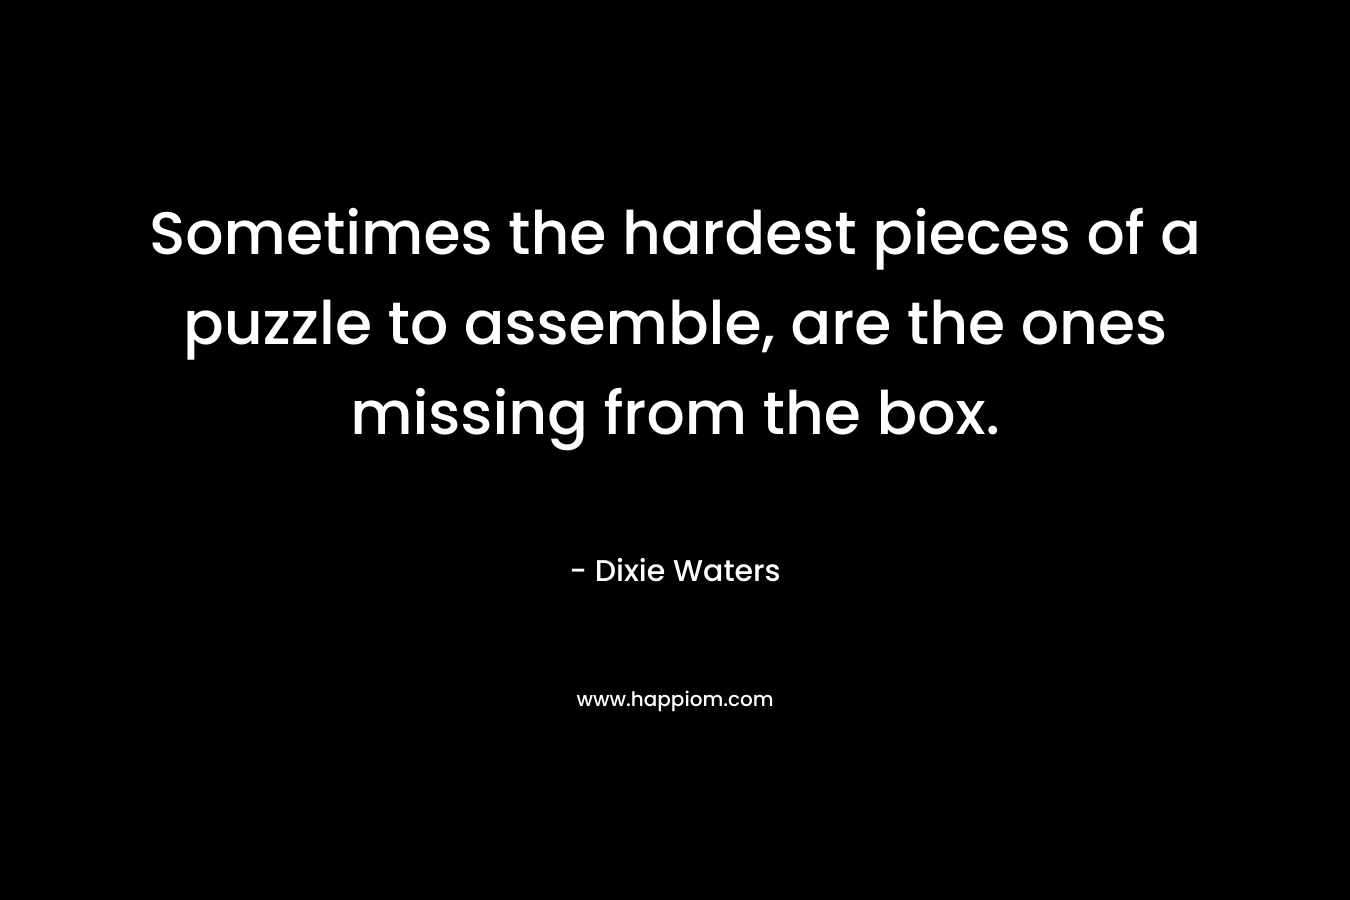 Sometimes the hardest pieces of a puzzle to assemble, are the ones missing from the box.